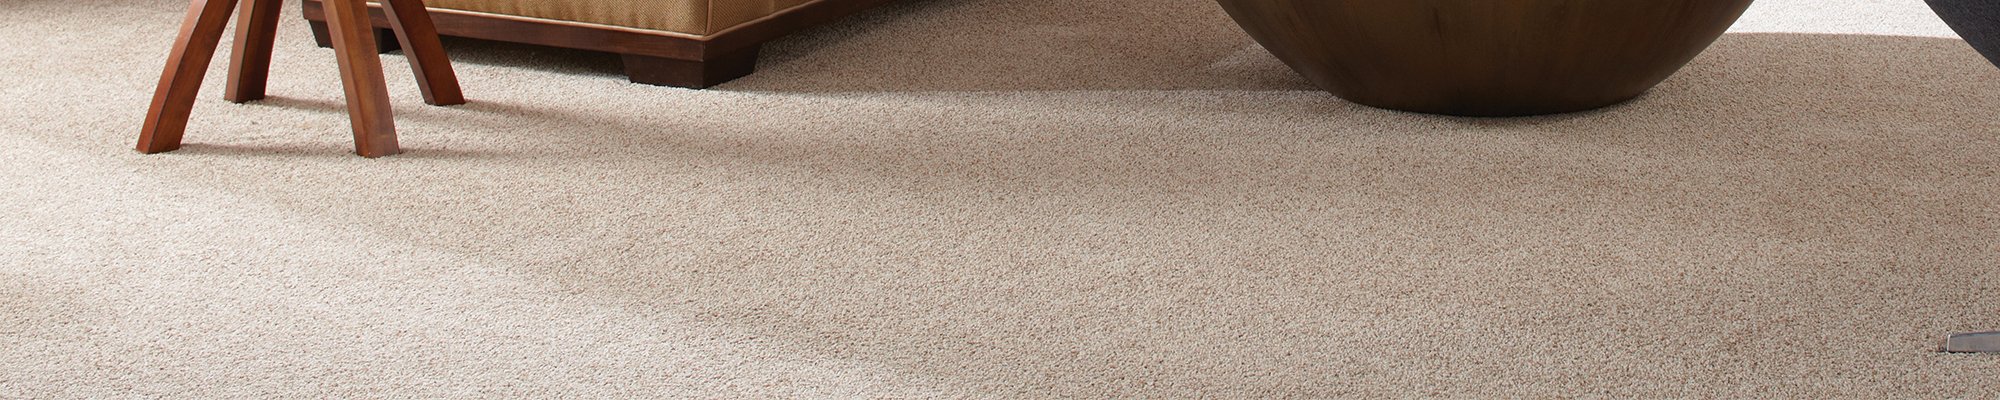 Floors USA has hundreds of in-stock carpet styles, including a variety of colors, fibers and weaves.